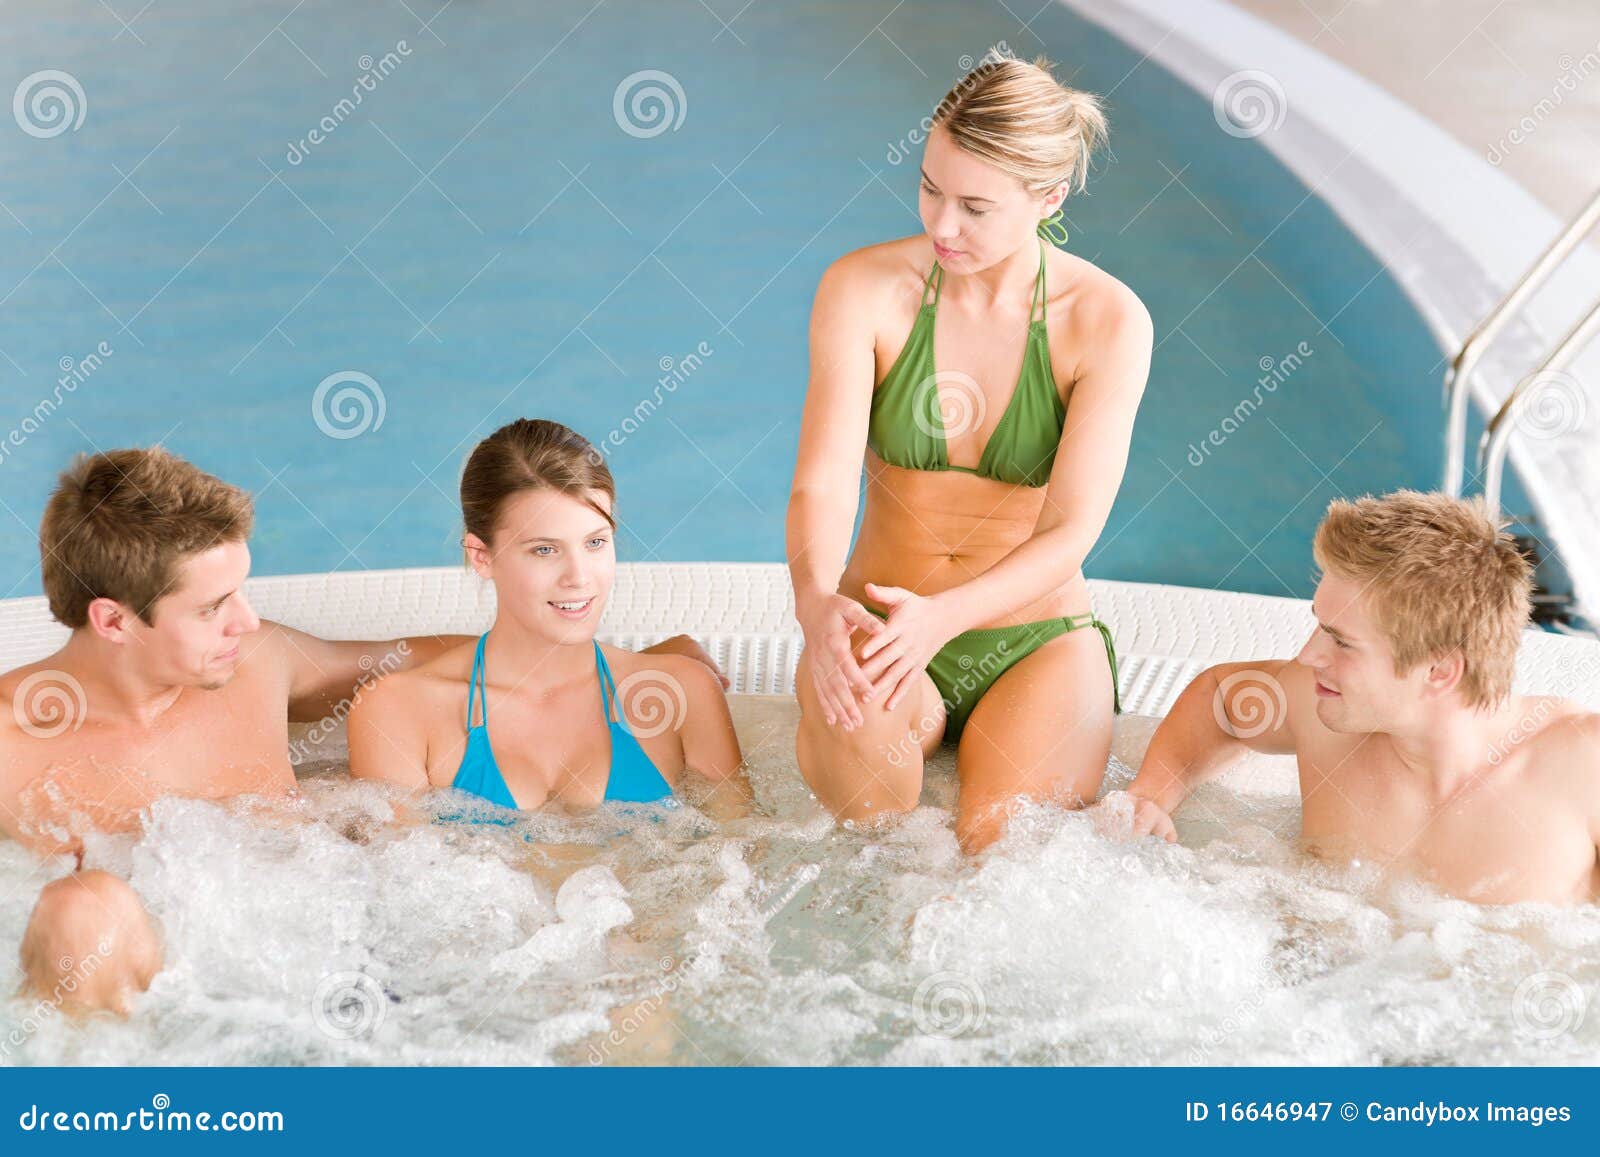 Swimming Pool Happy Couple Relax In Hot Tub Stock Image